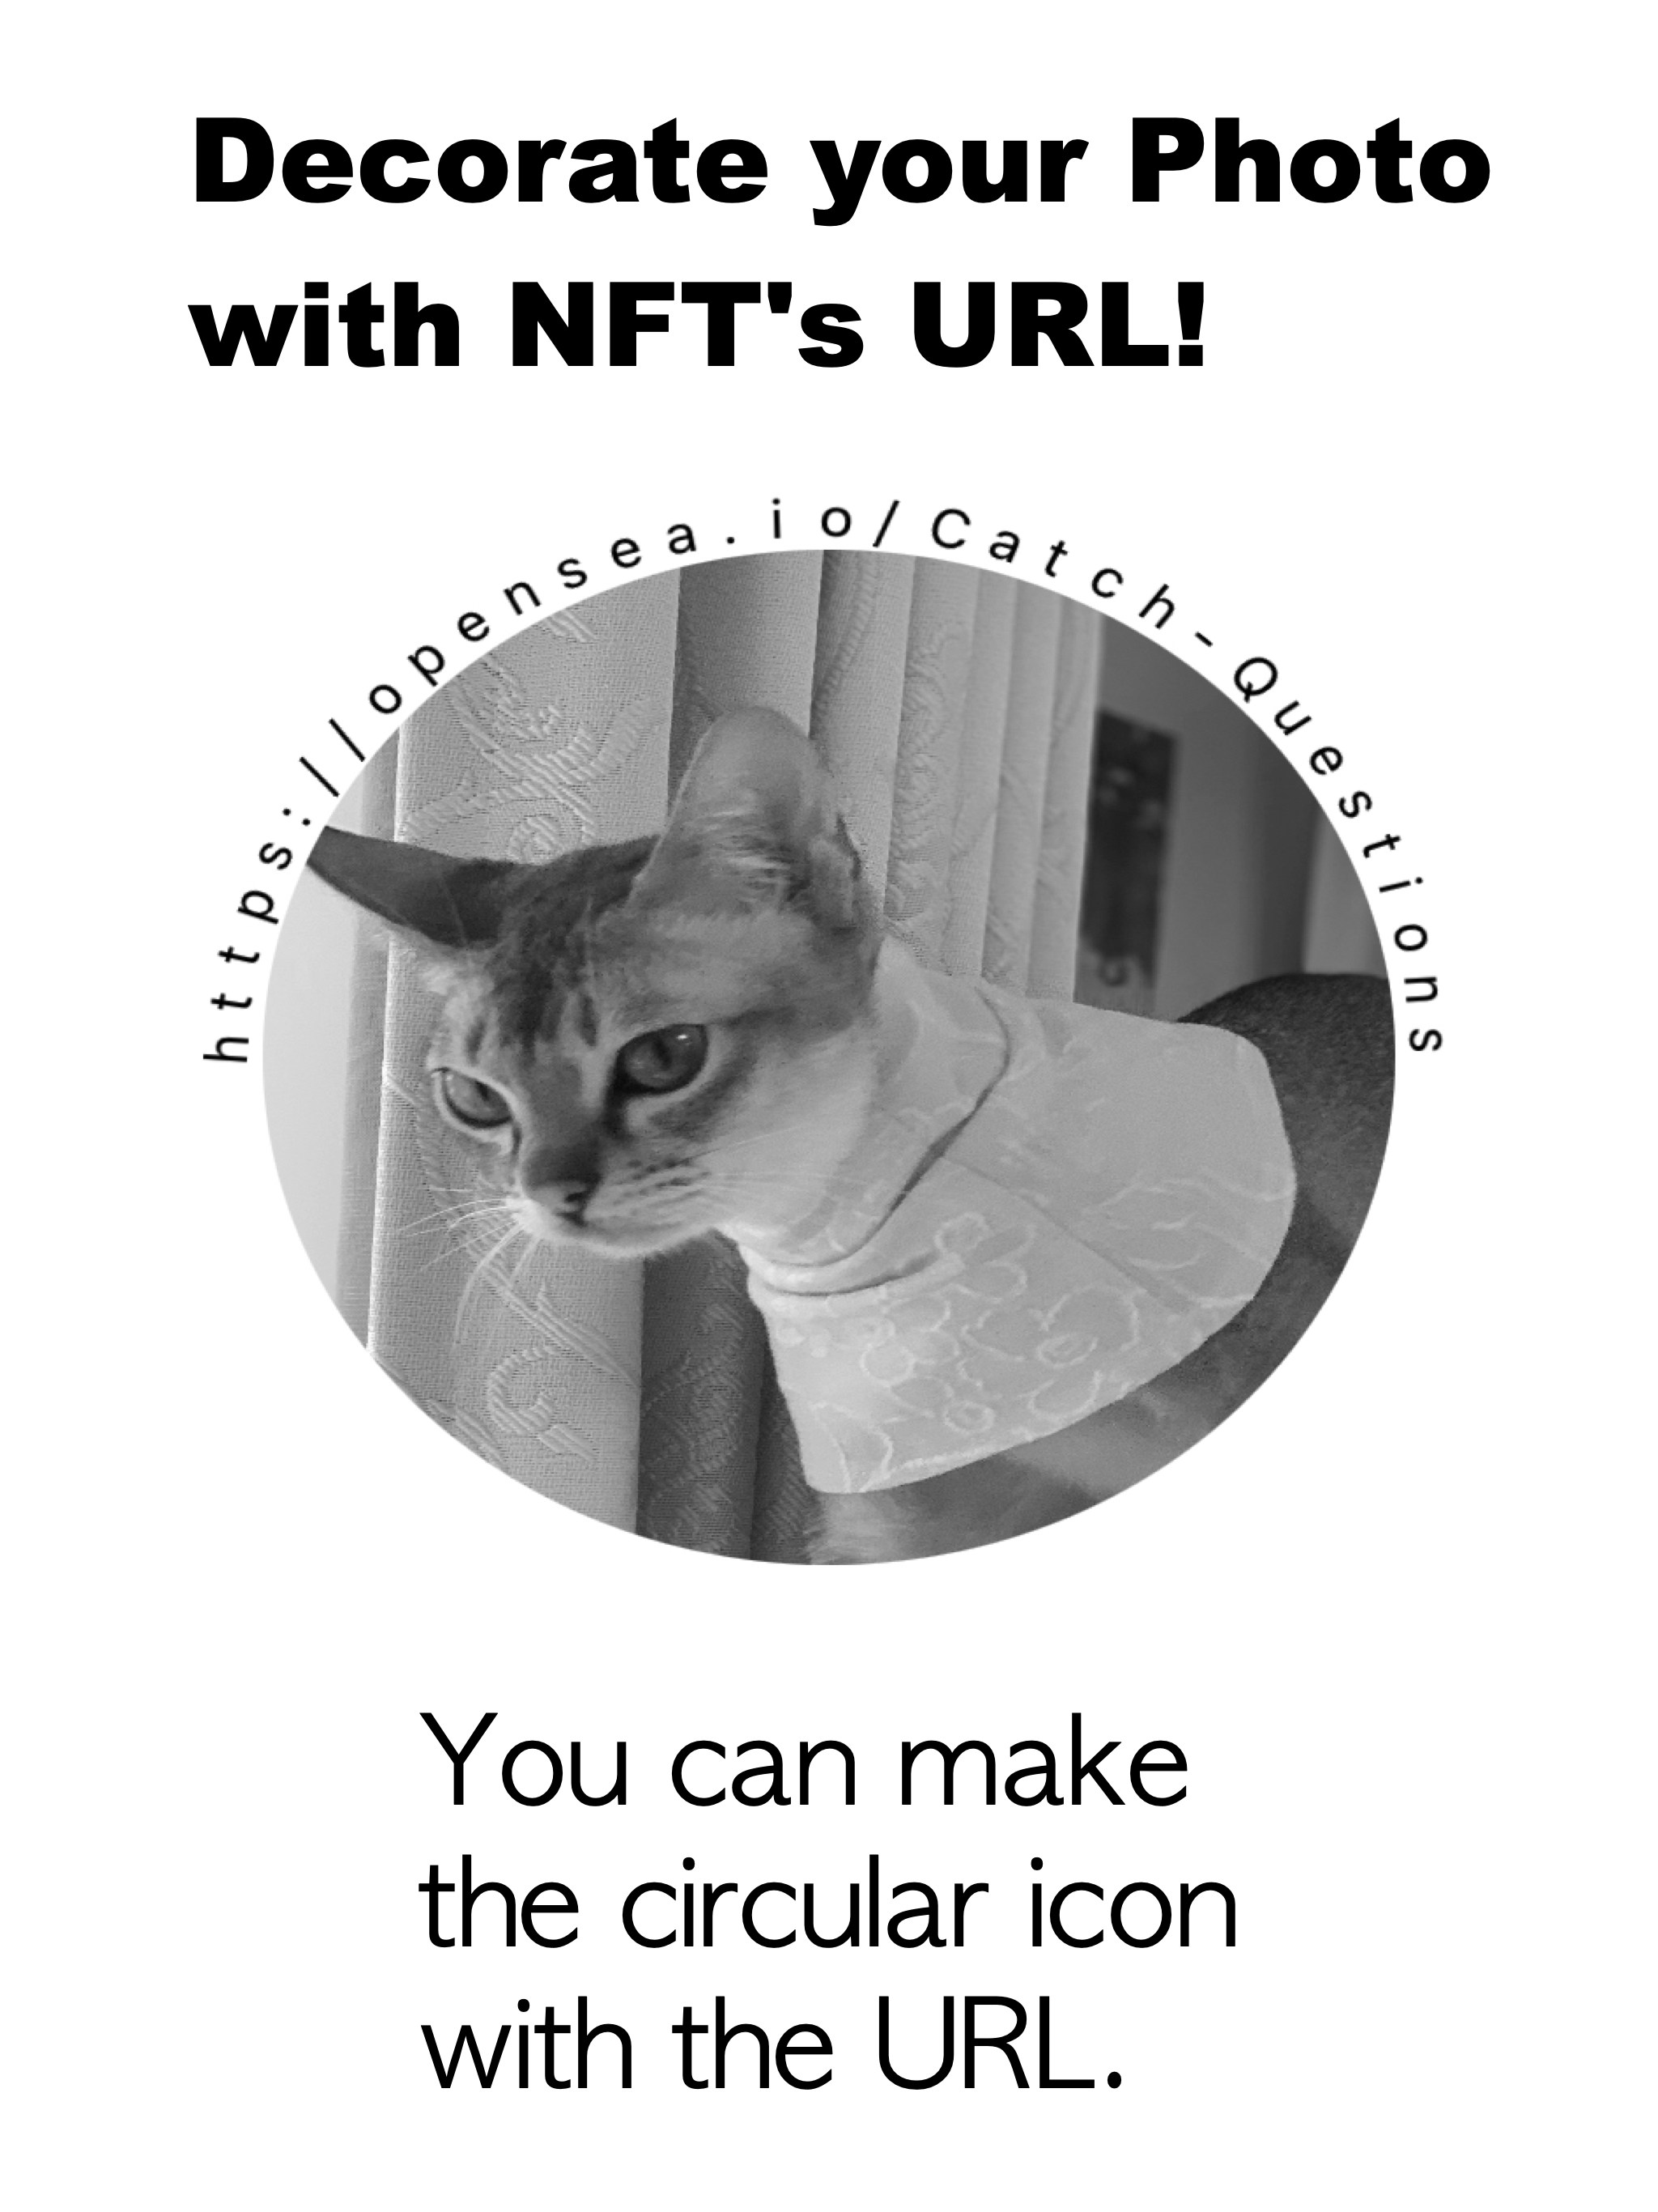 Decorate your photo with NFT's URL. You can make a circular photo with url.